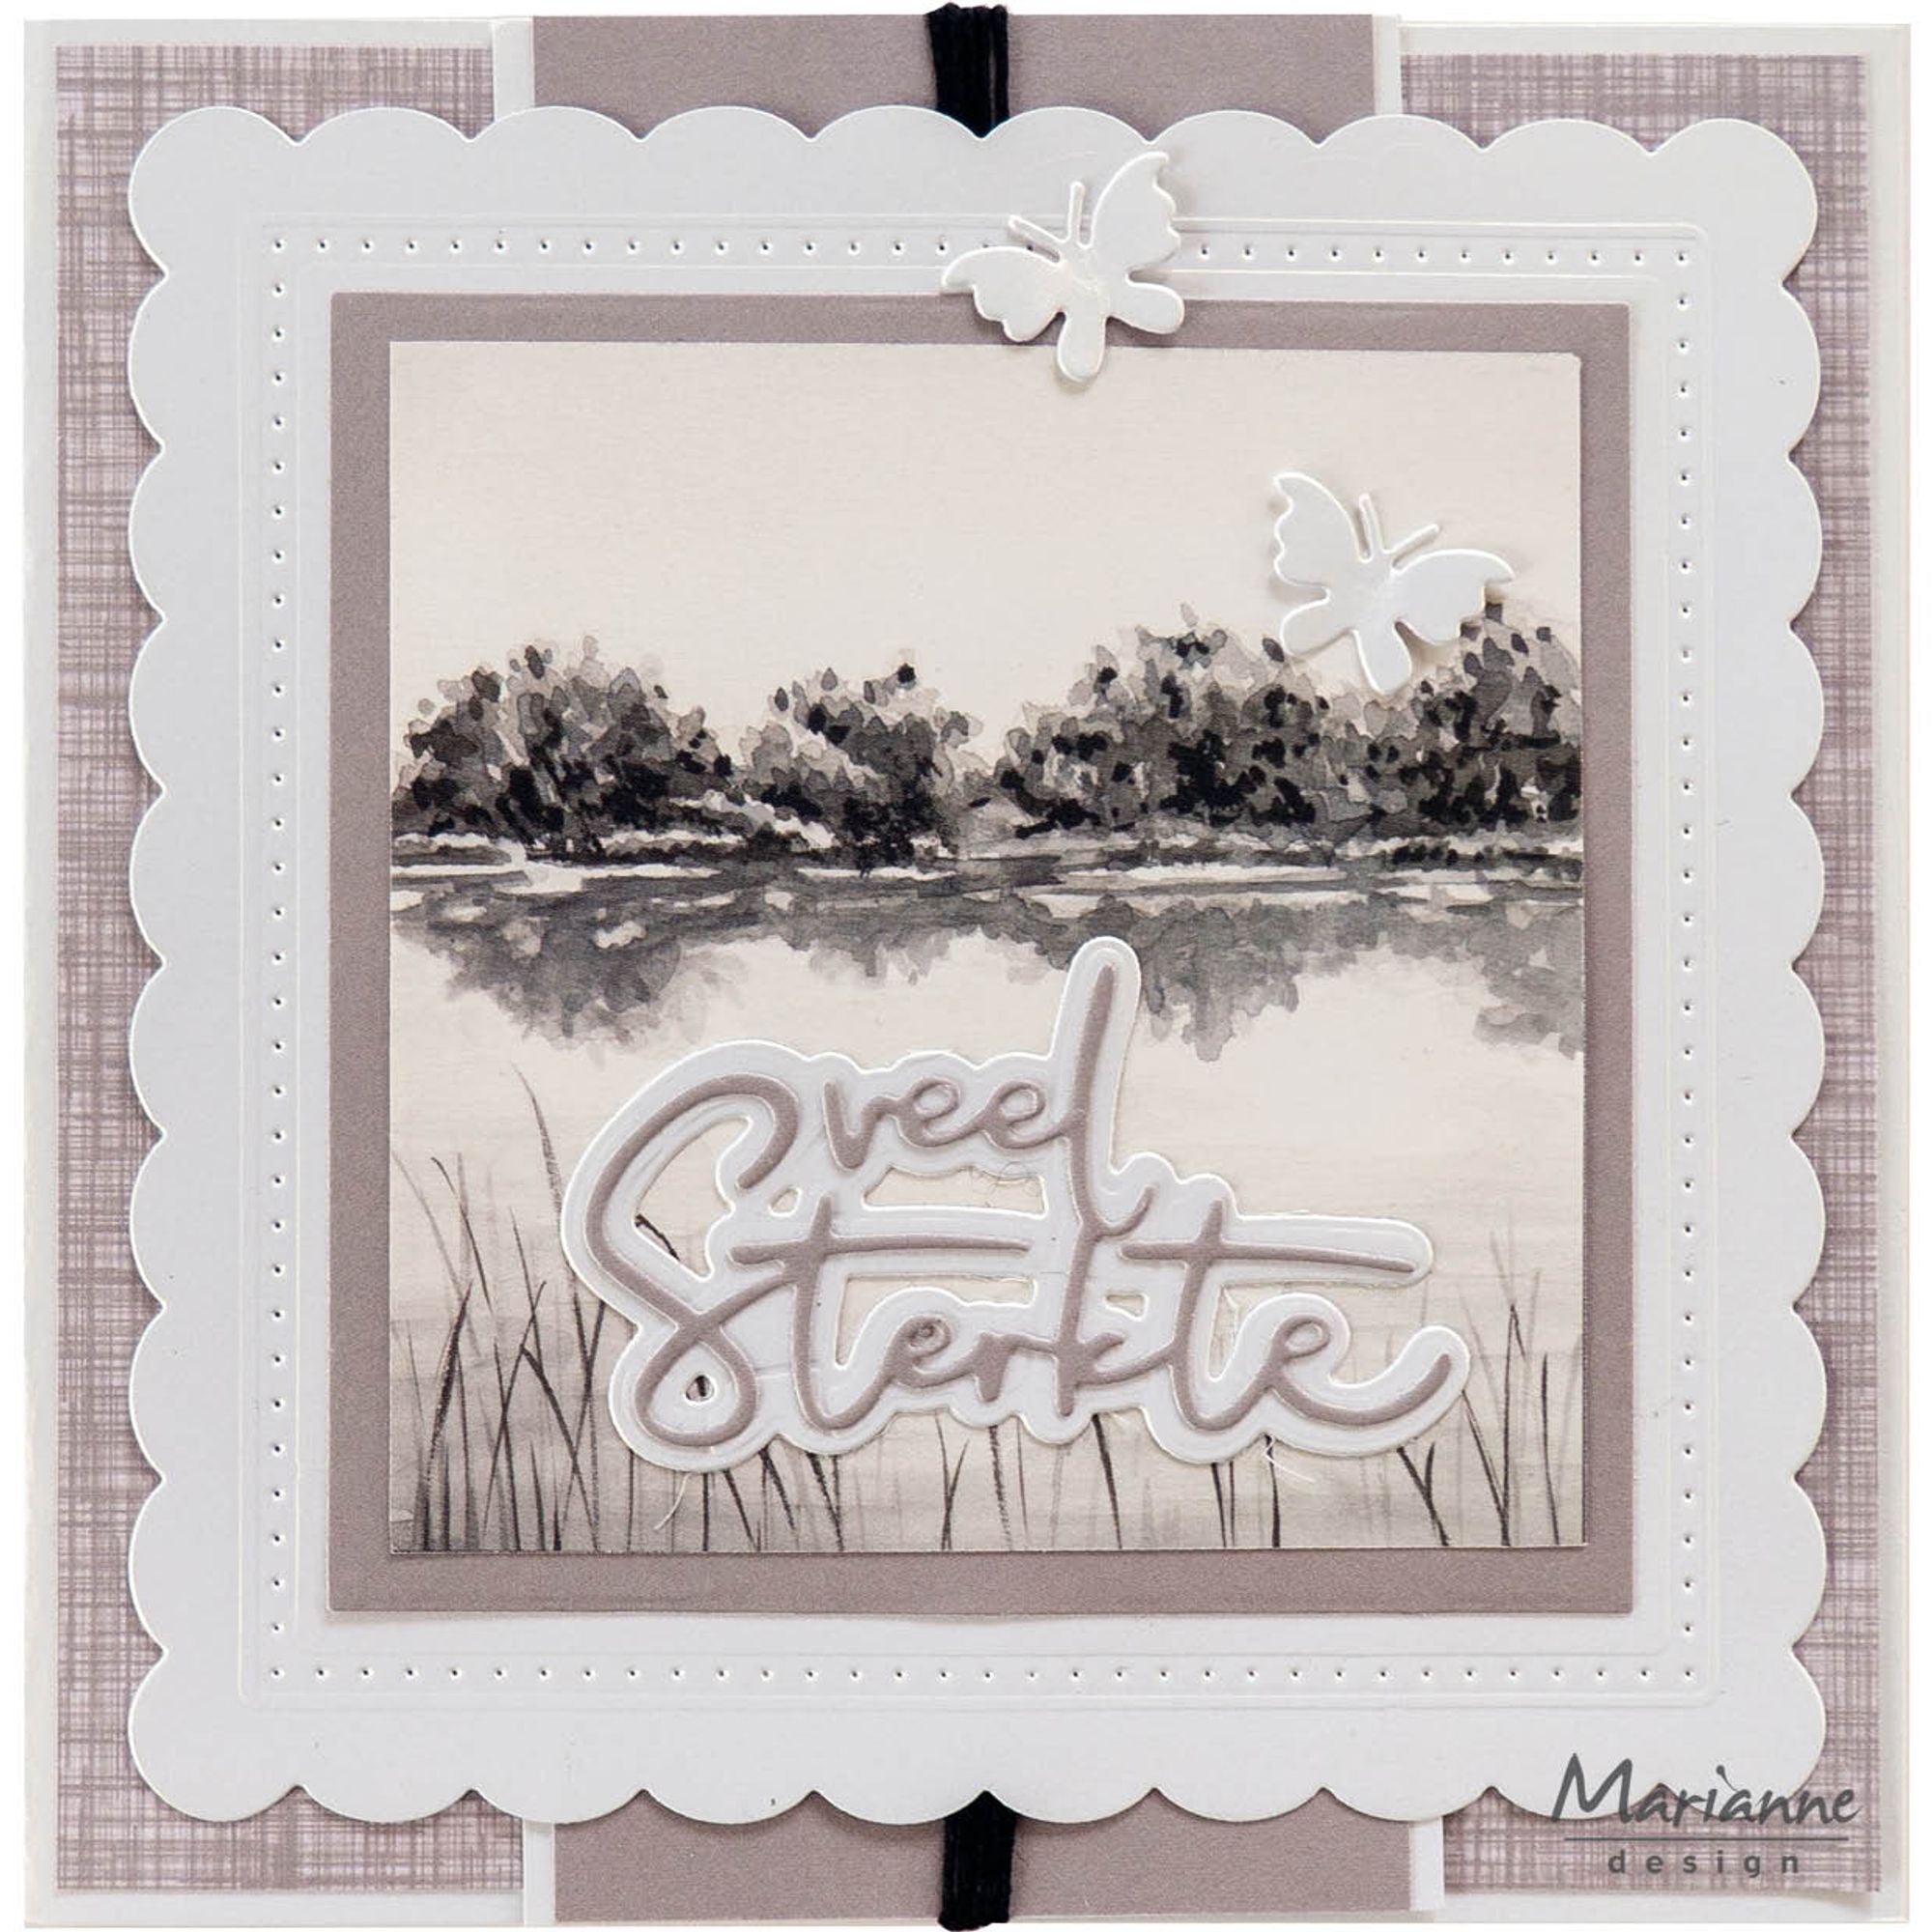 Marianne Design A4 Cutting Sheet - Tiny's Serenity